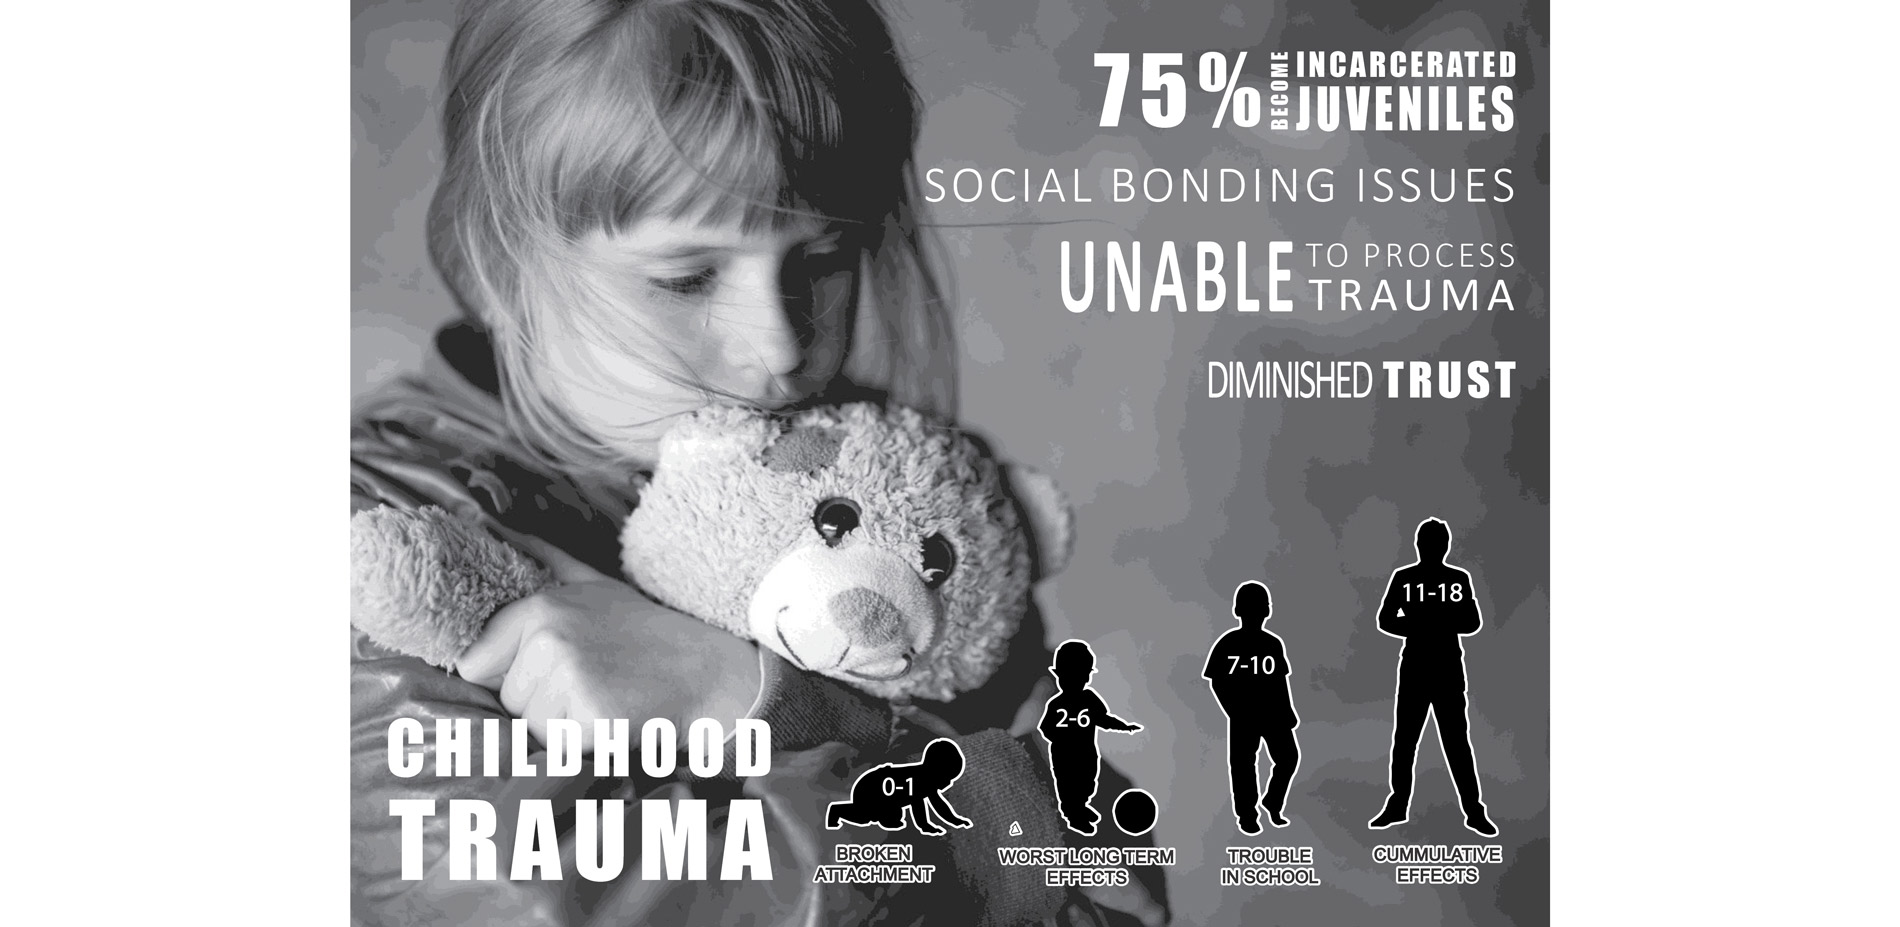 Over 1.7 million children in the US are coping with parental incarceration. Parental incarceration induces trauma on children, leading to stress and i…